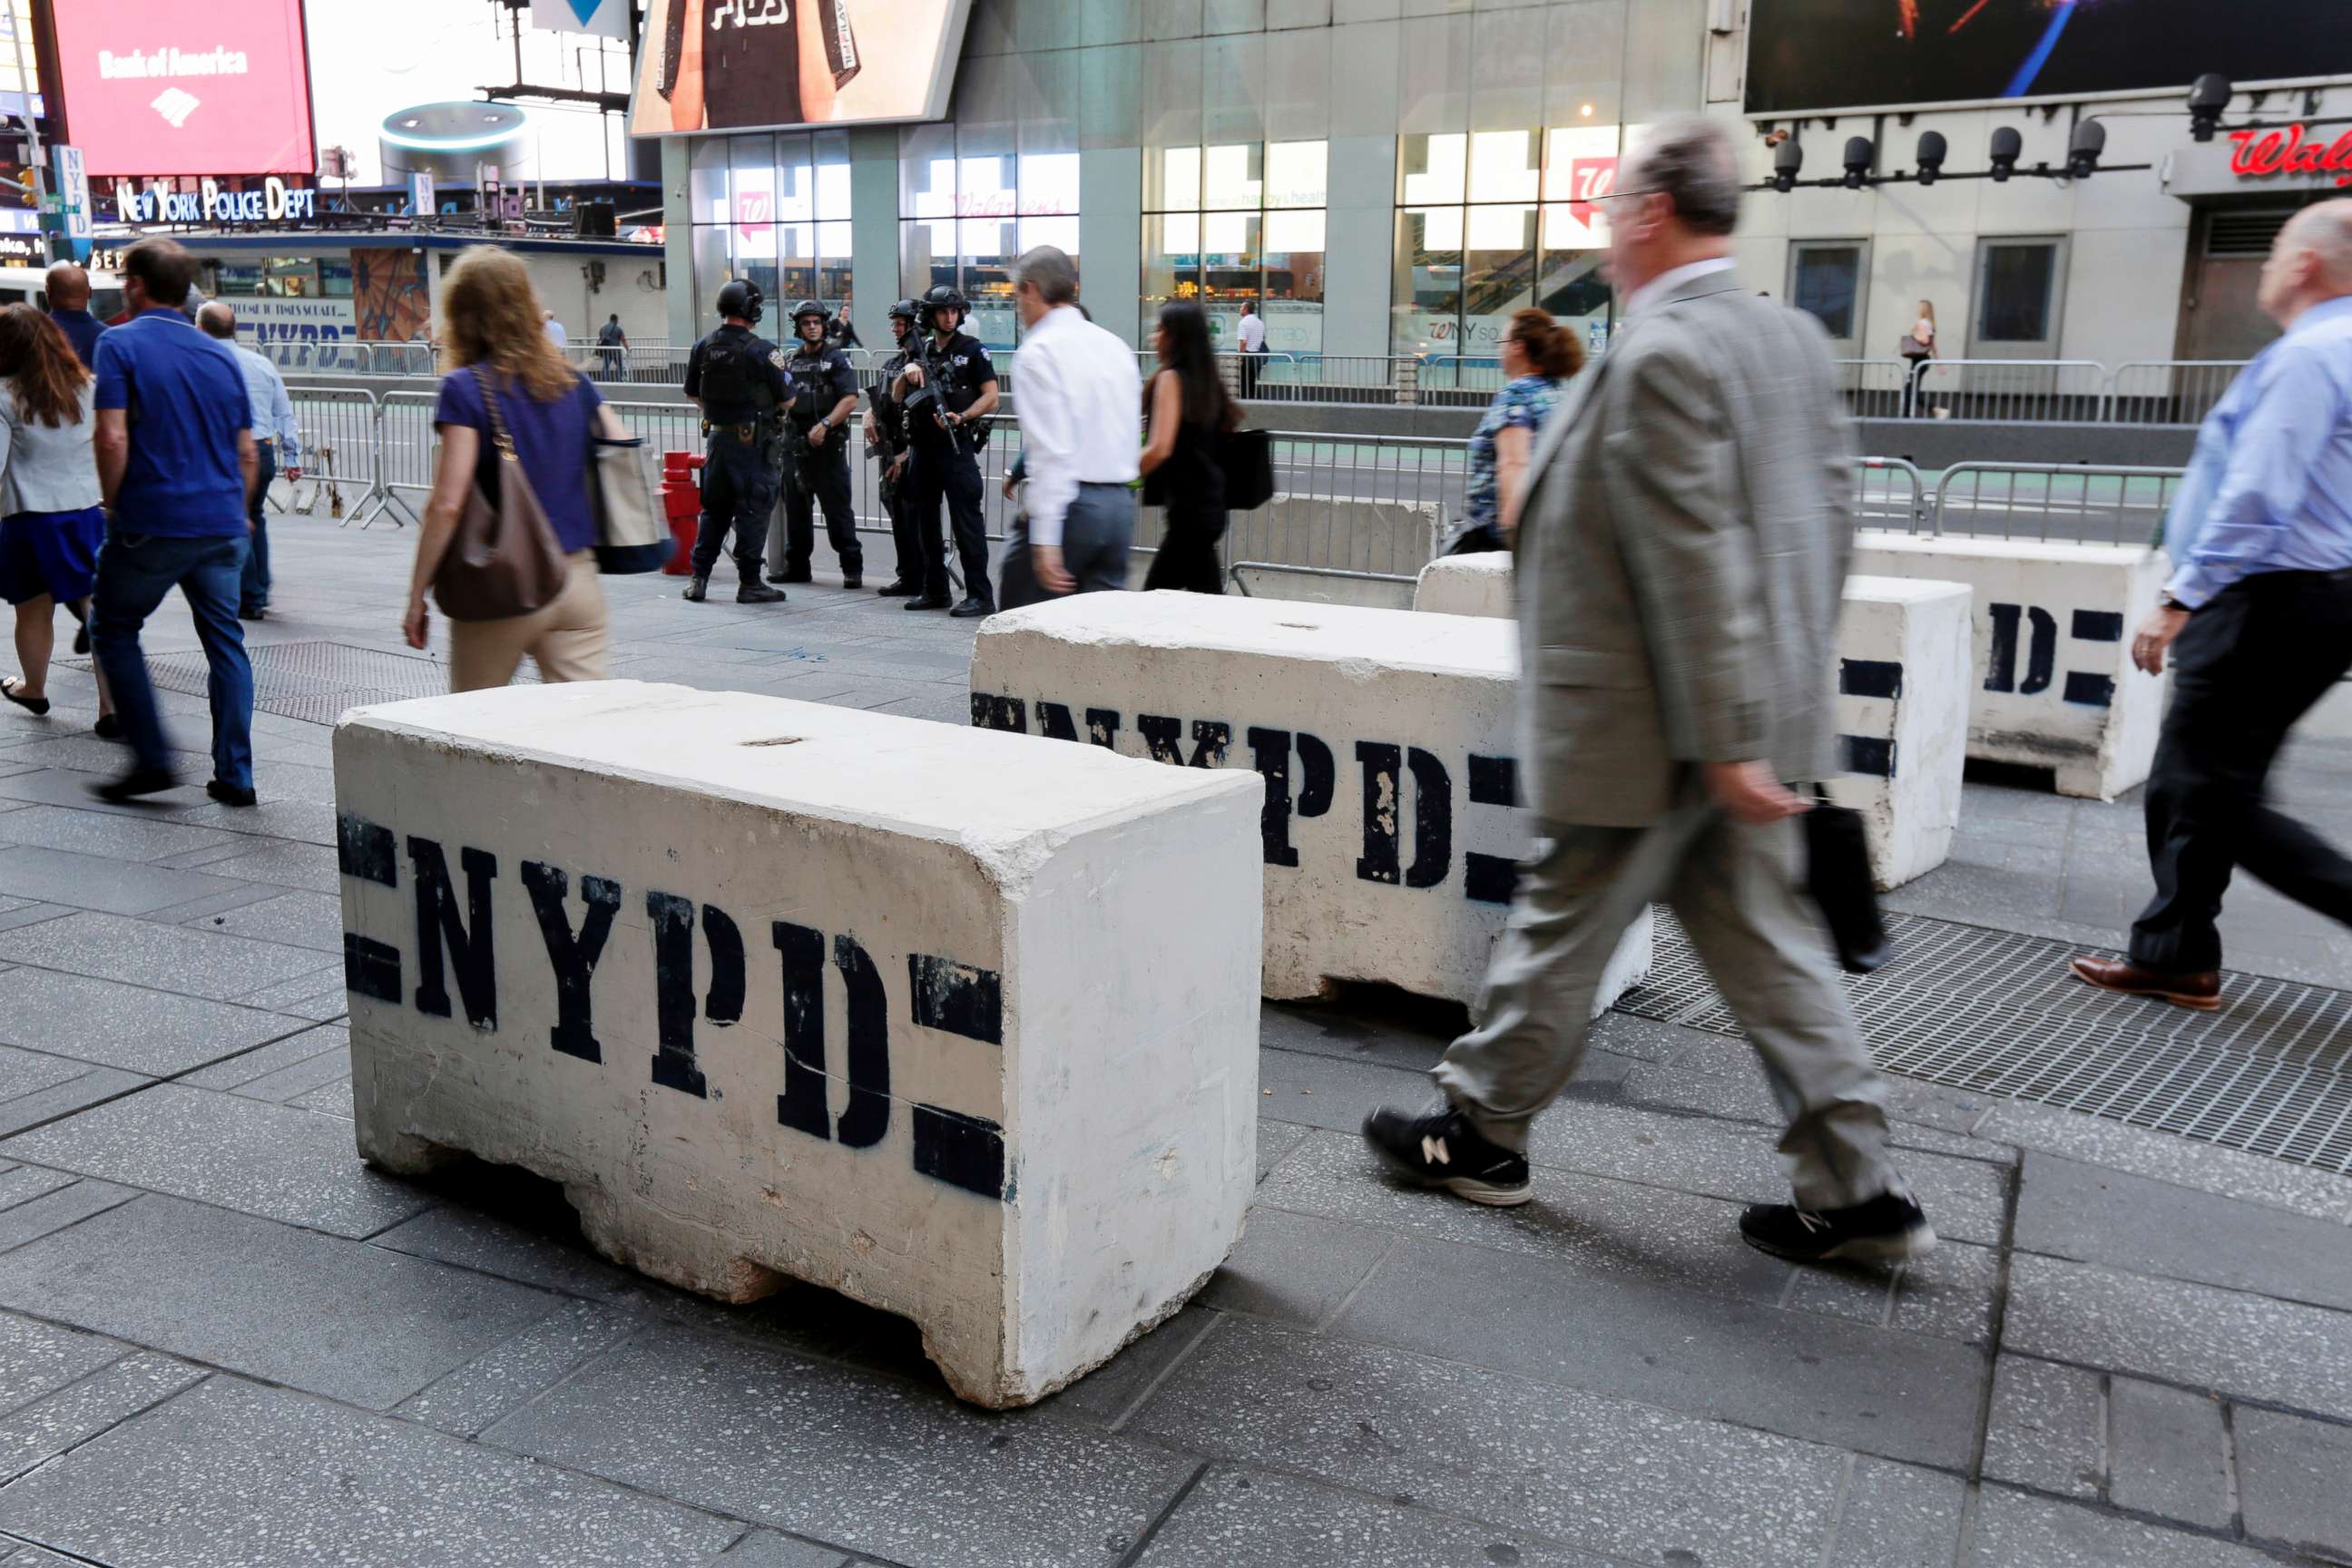 PHOTO: Pedestrians navigate concrete safety barriers in New York Times Square, May 19, 2017.